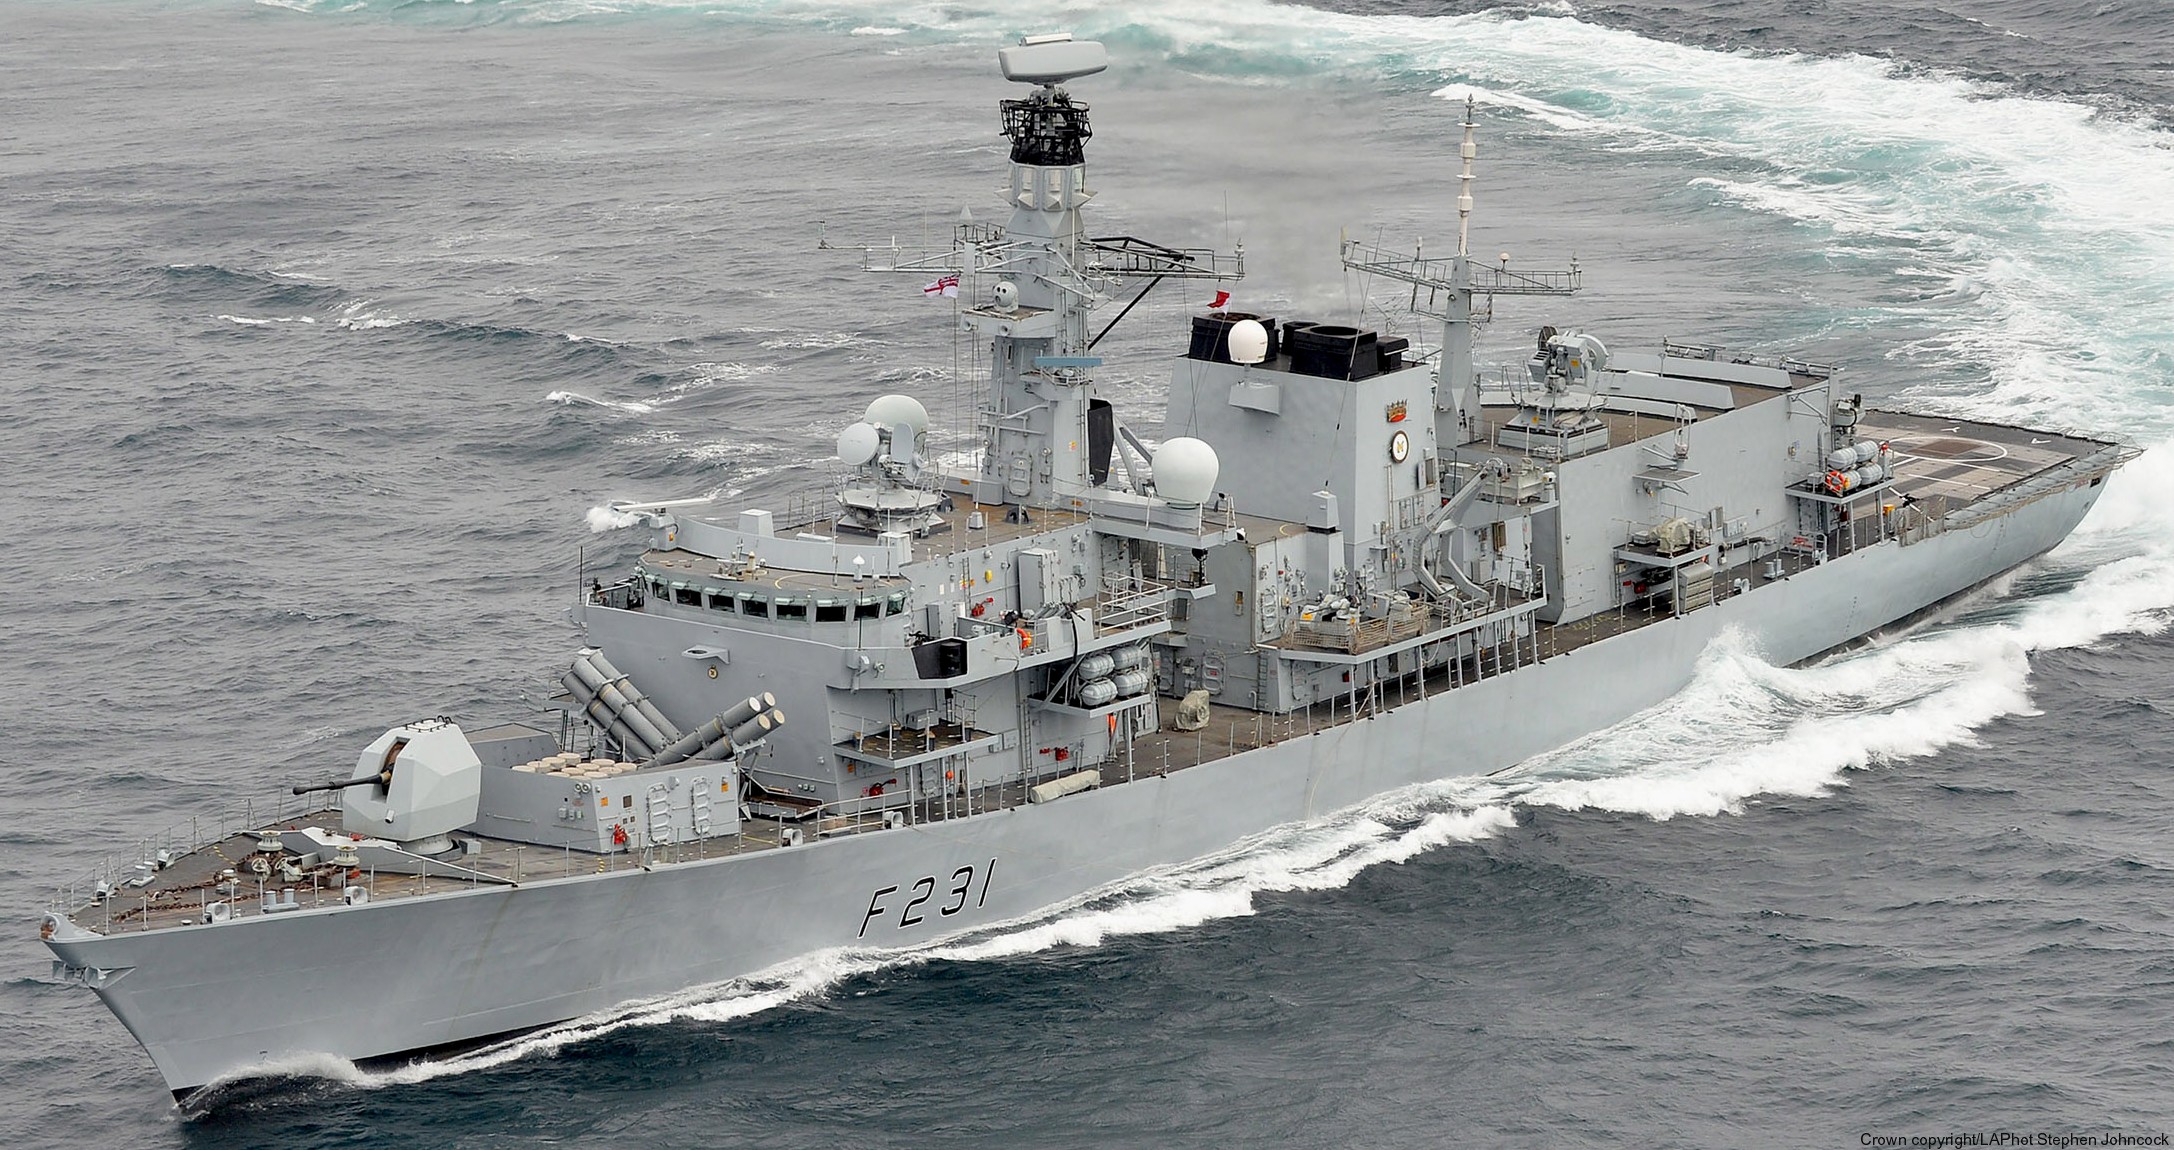 ThinkOutOfTheBox: Two Type 23 frigates, HMS Argyll and Westminster looking for a new owner?